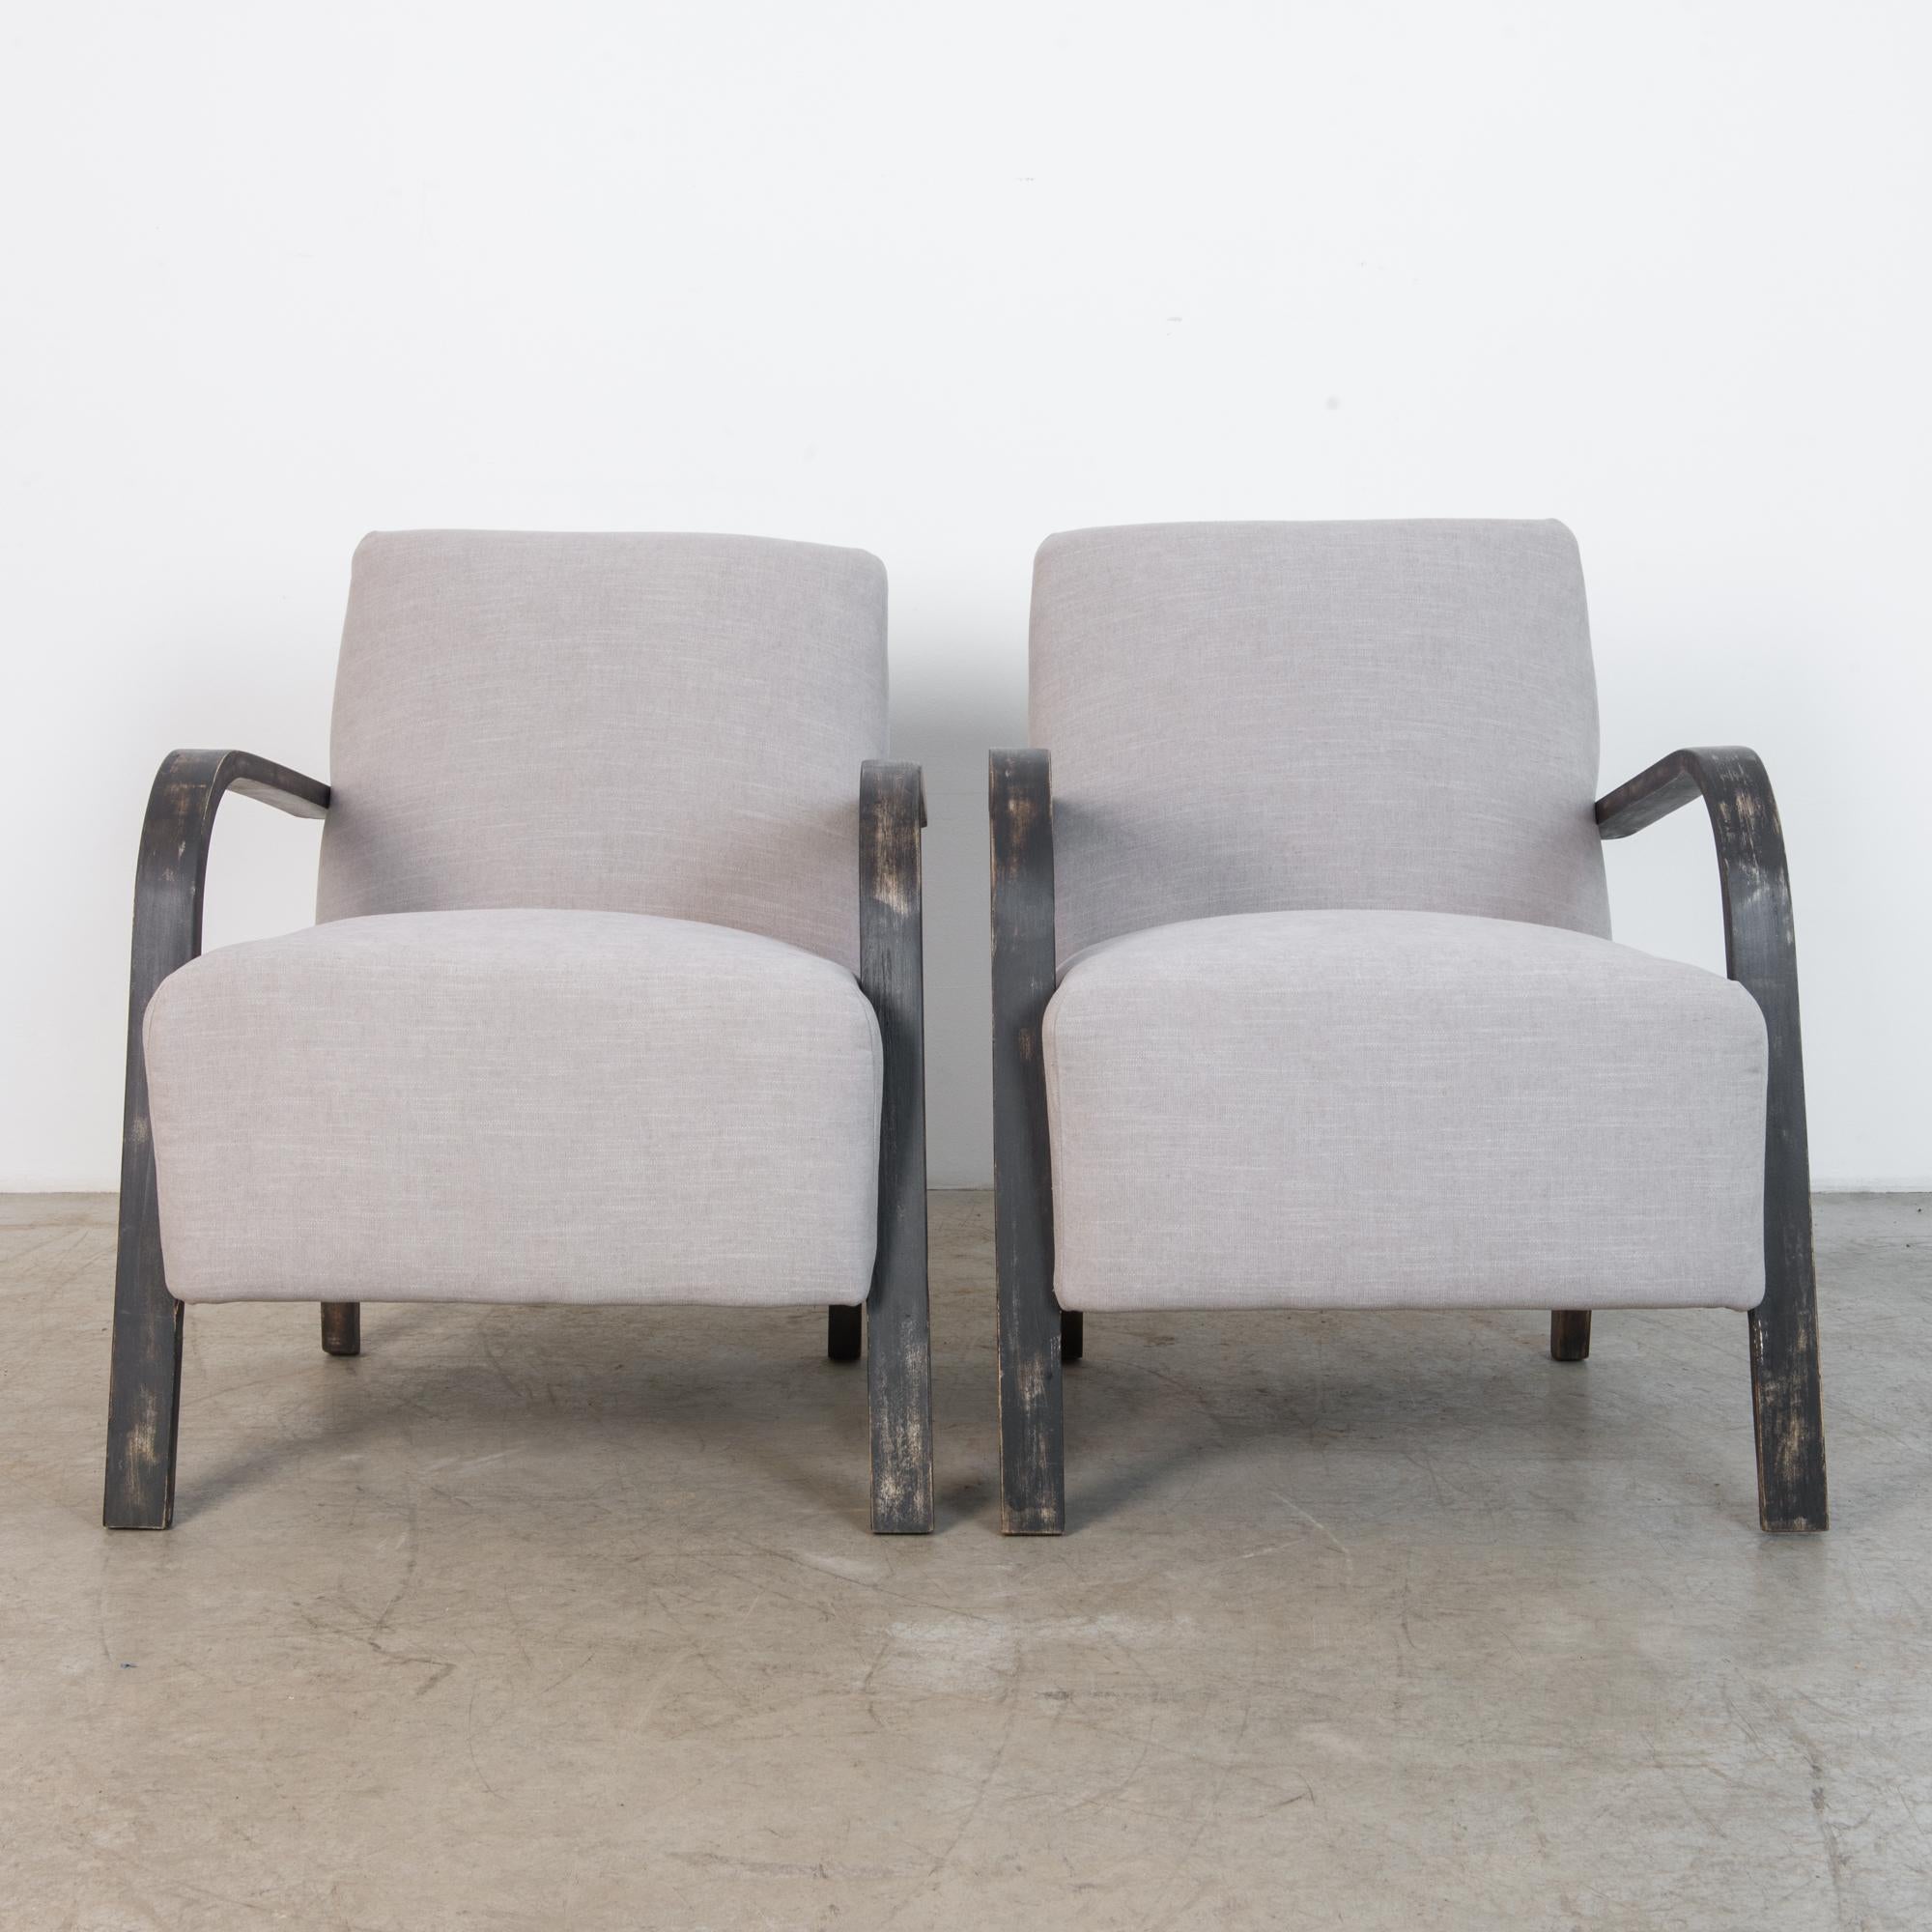 A Classic mid-20th century Czech design, circa 1950. A simple and elegant geometry contrasts the soft and comfortable seat with geometric bentwood element, in striking black and grey. Borrowing the vocabulary of modernism, central European designers